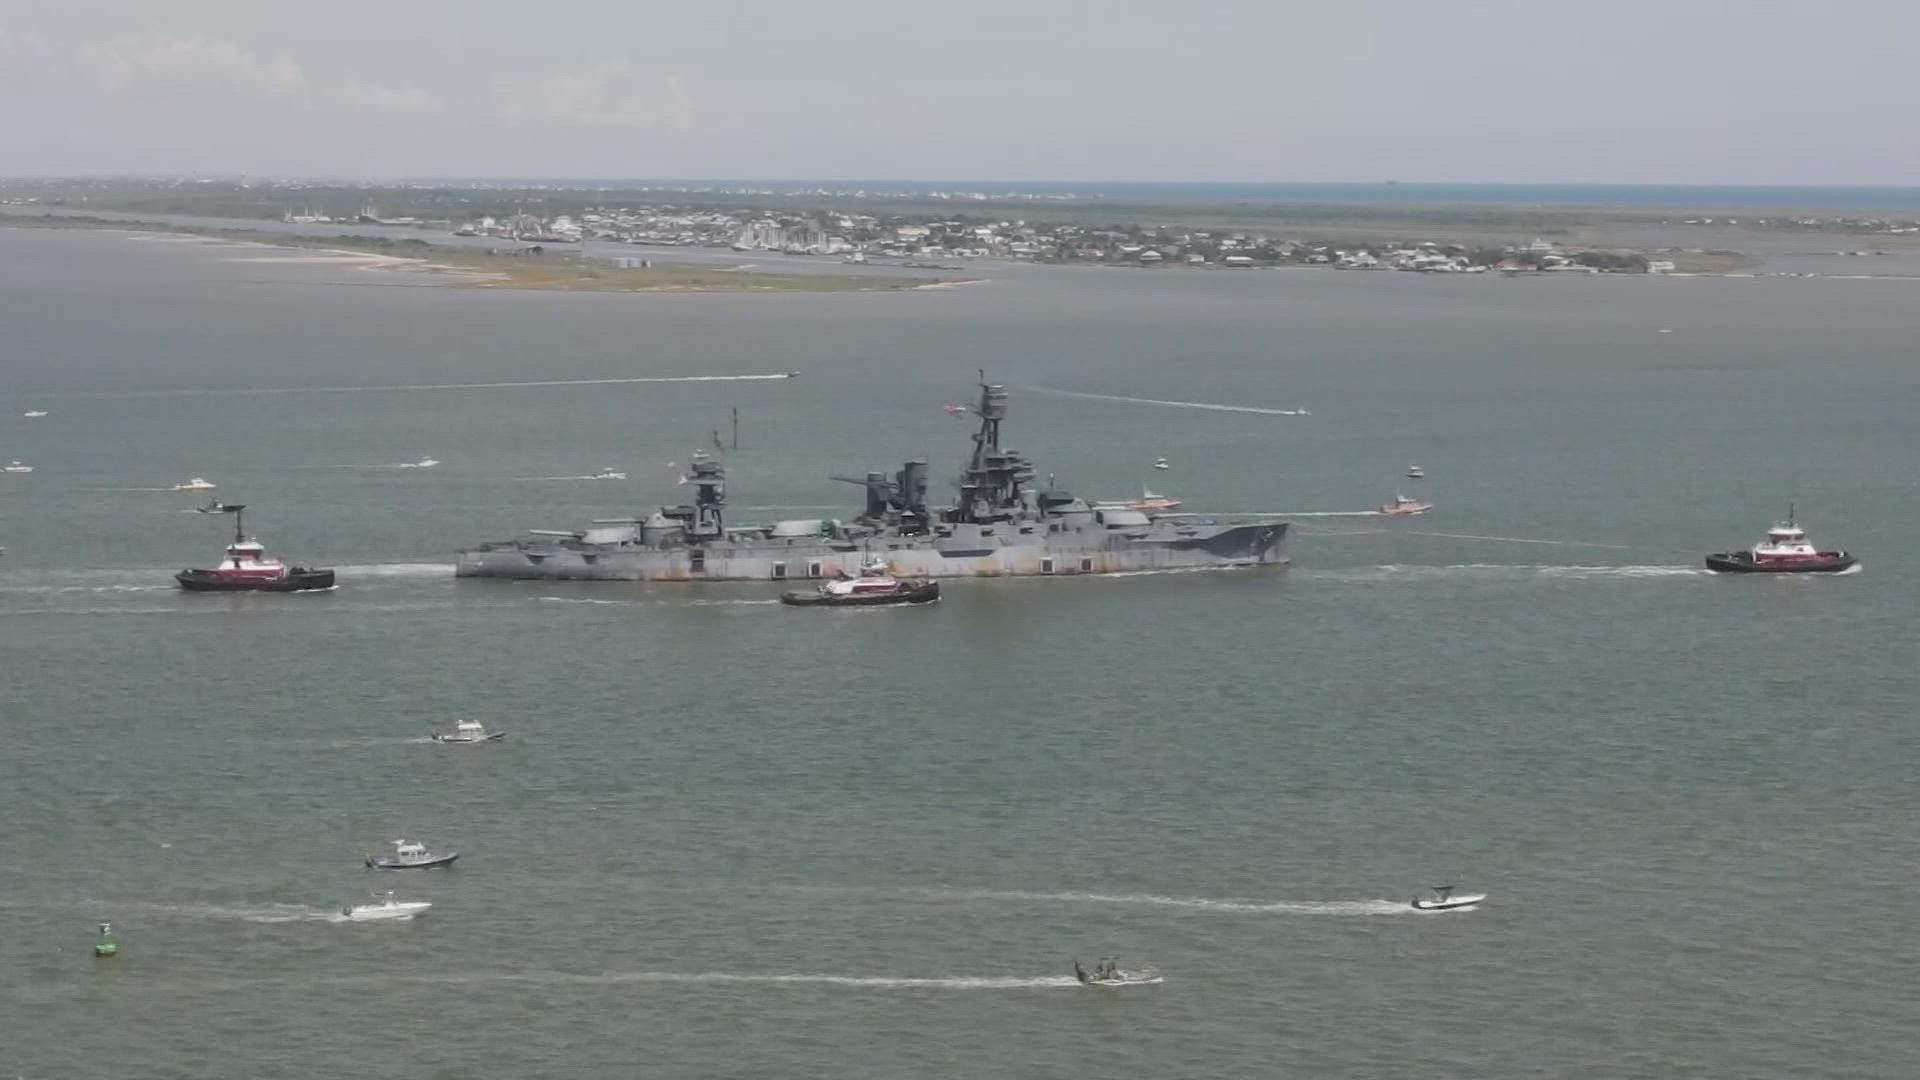 Battleship Texas is now docked in its temporary home after an 8-hour trip from La Porte to Galveston.